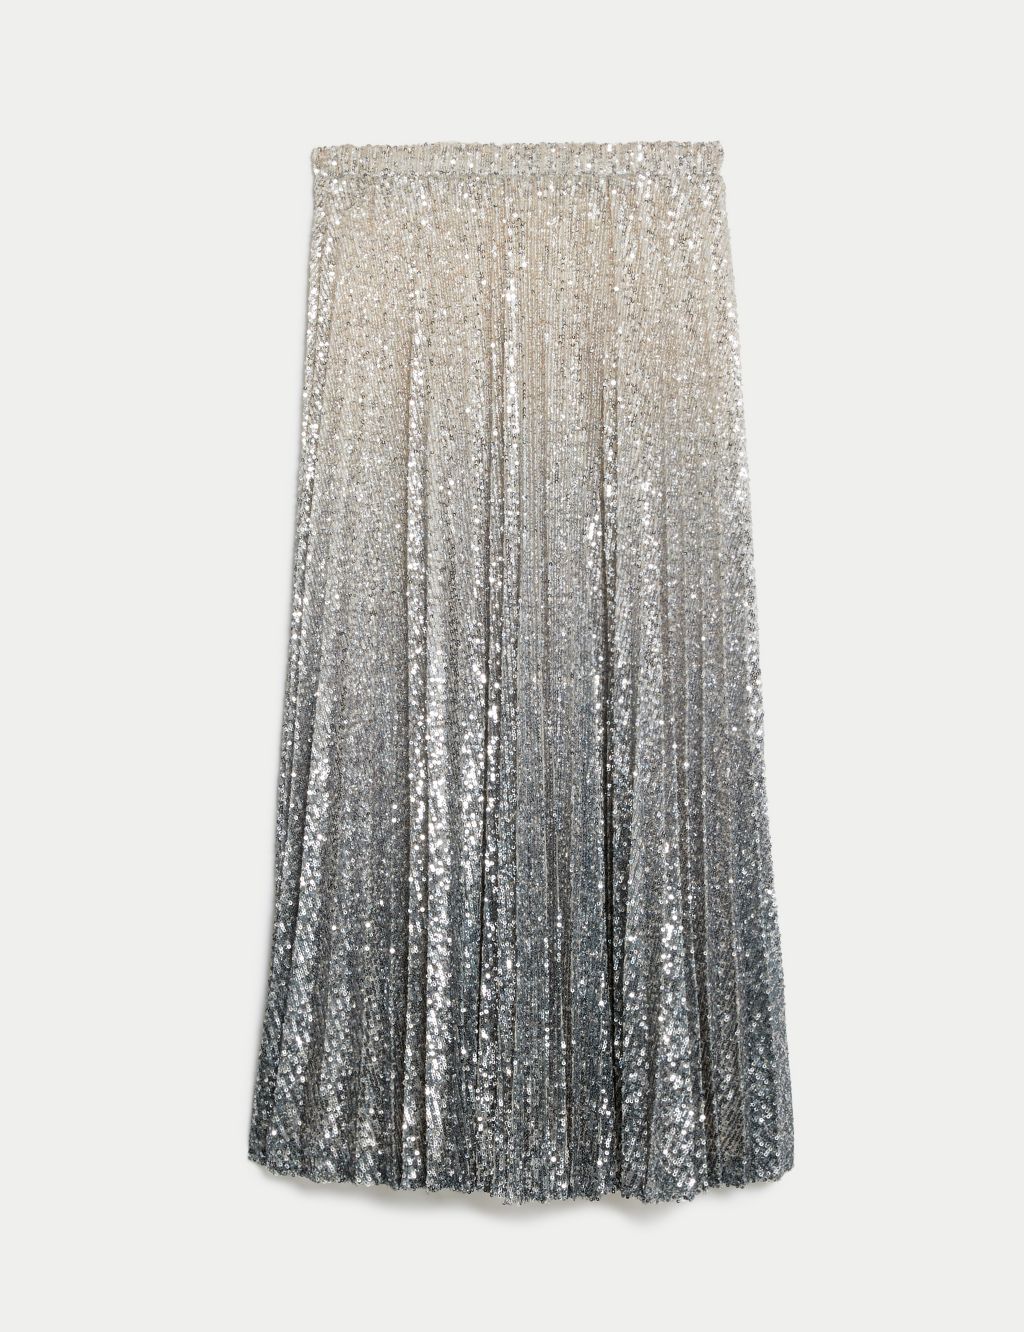 Sequin Ombre Pleated Midaxi Skirt image 2